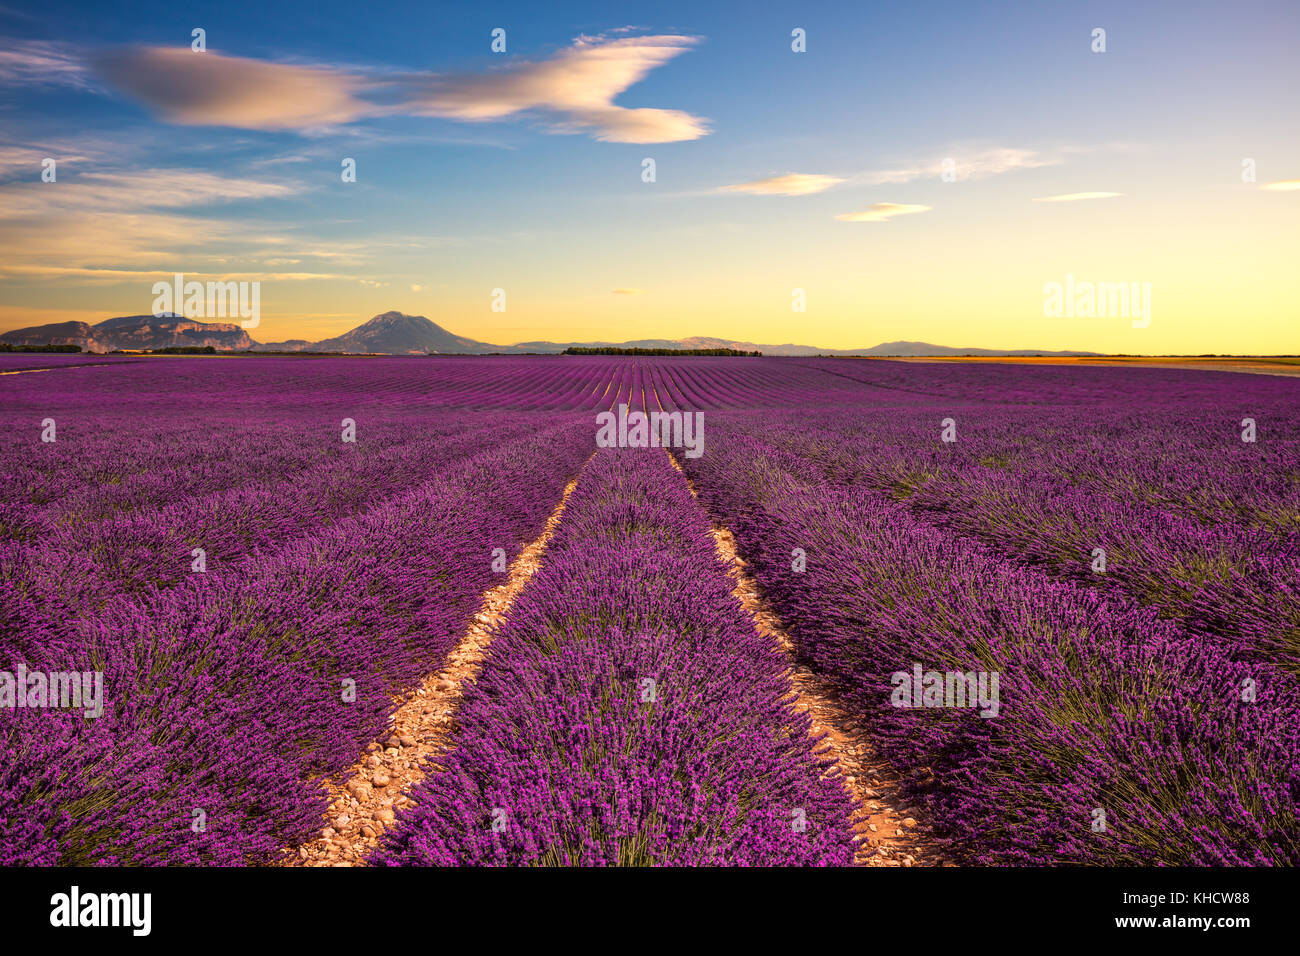 Lavender flower blooming scented fields in endless rows on sunset. Valensole plateau, Provence, France, Europe. Stock Photo